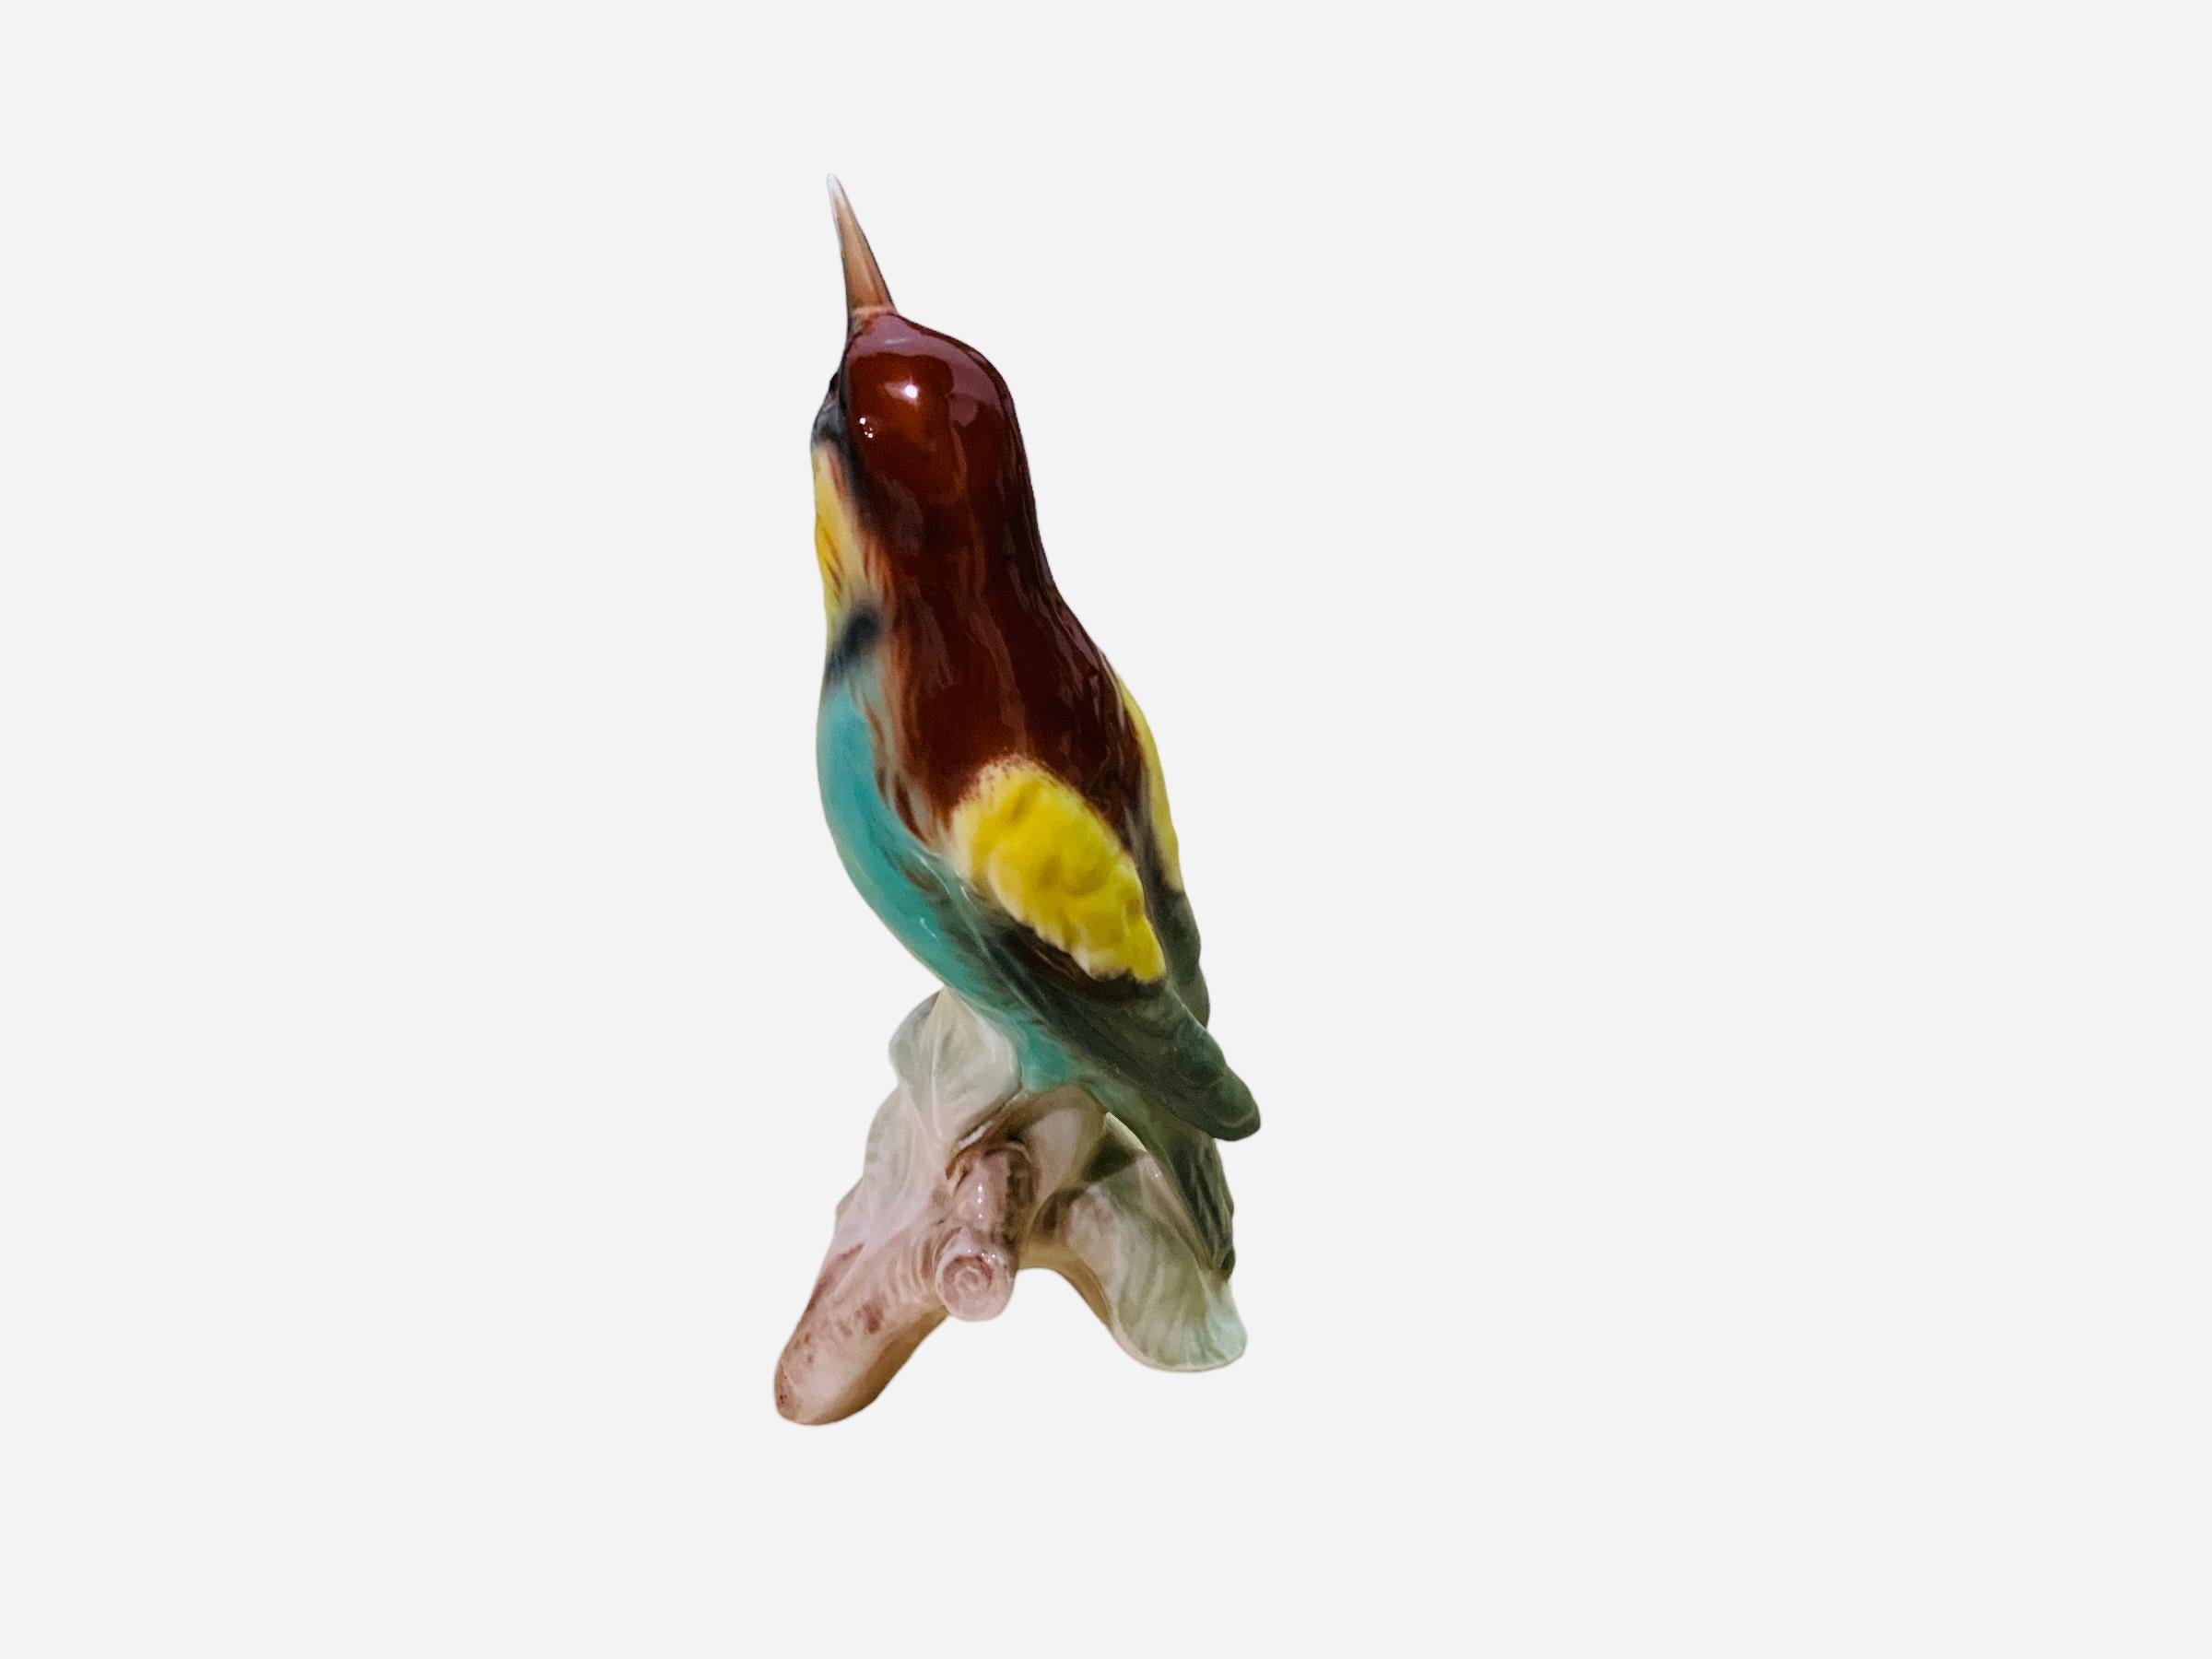 This is a Goebel porcelain figurine of a bird. It depicts a very well done hand painted Bee Eater. It is standing up over a branch with few leaves. It is hallmarked Goebel, Germany at the base.